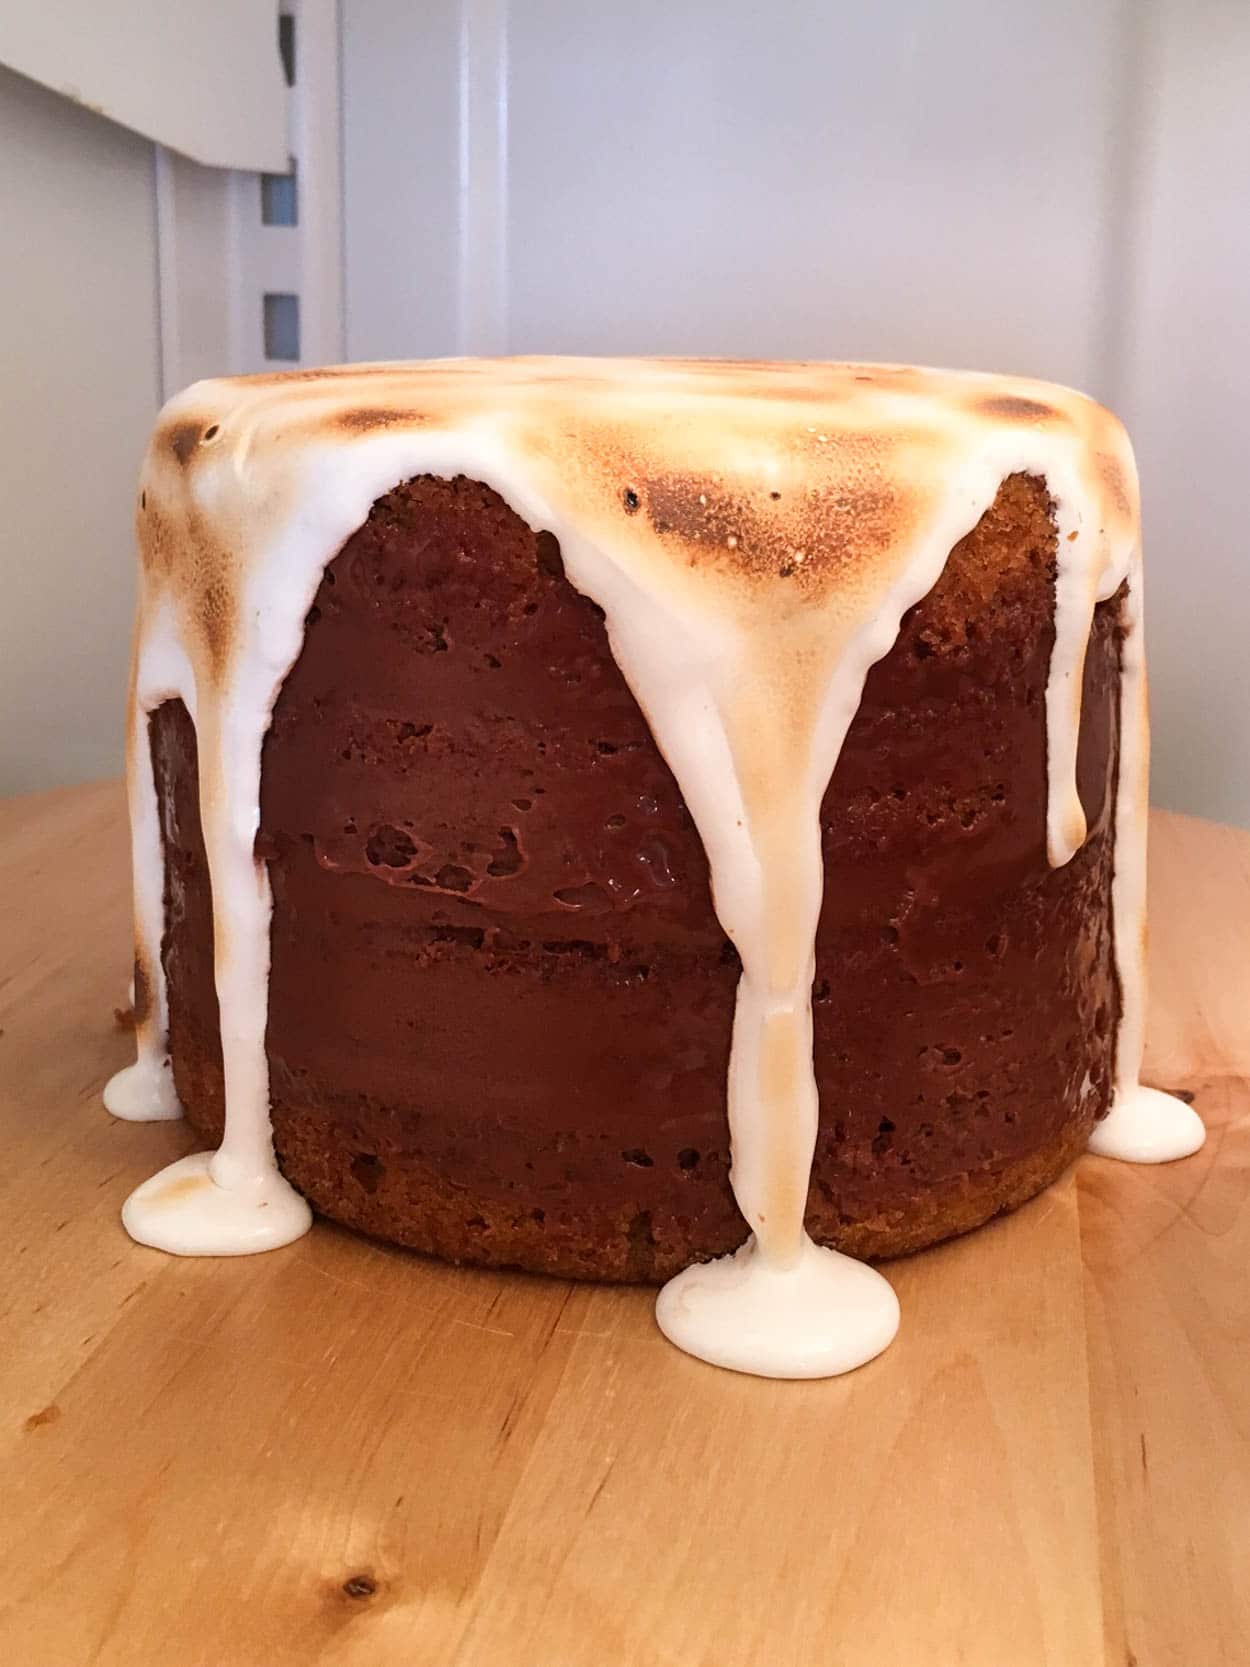 Cake with marshmallow drip in the fridge.